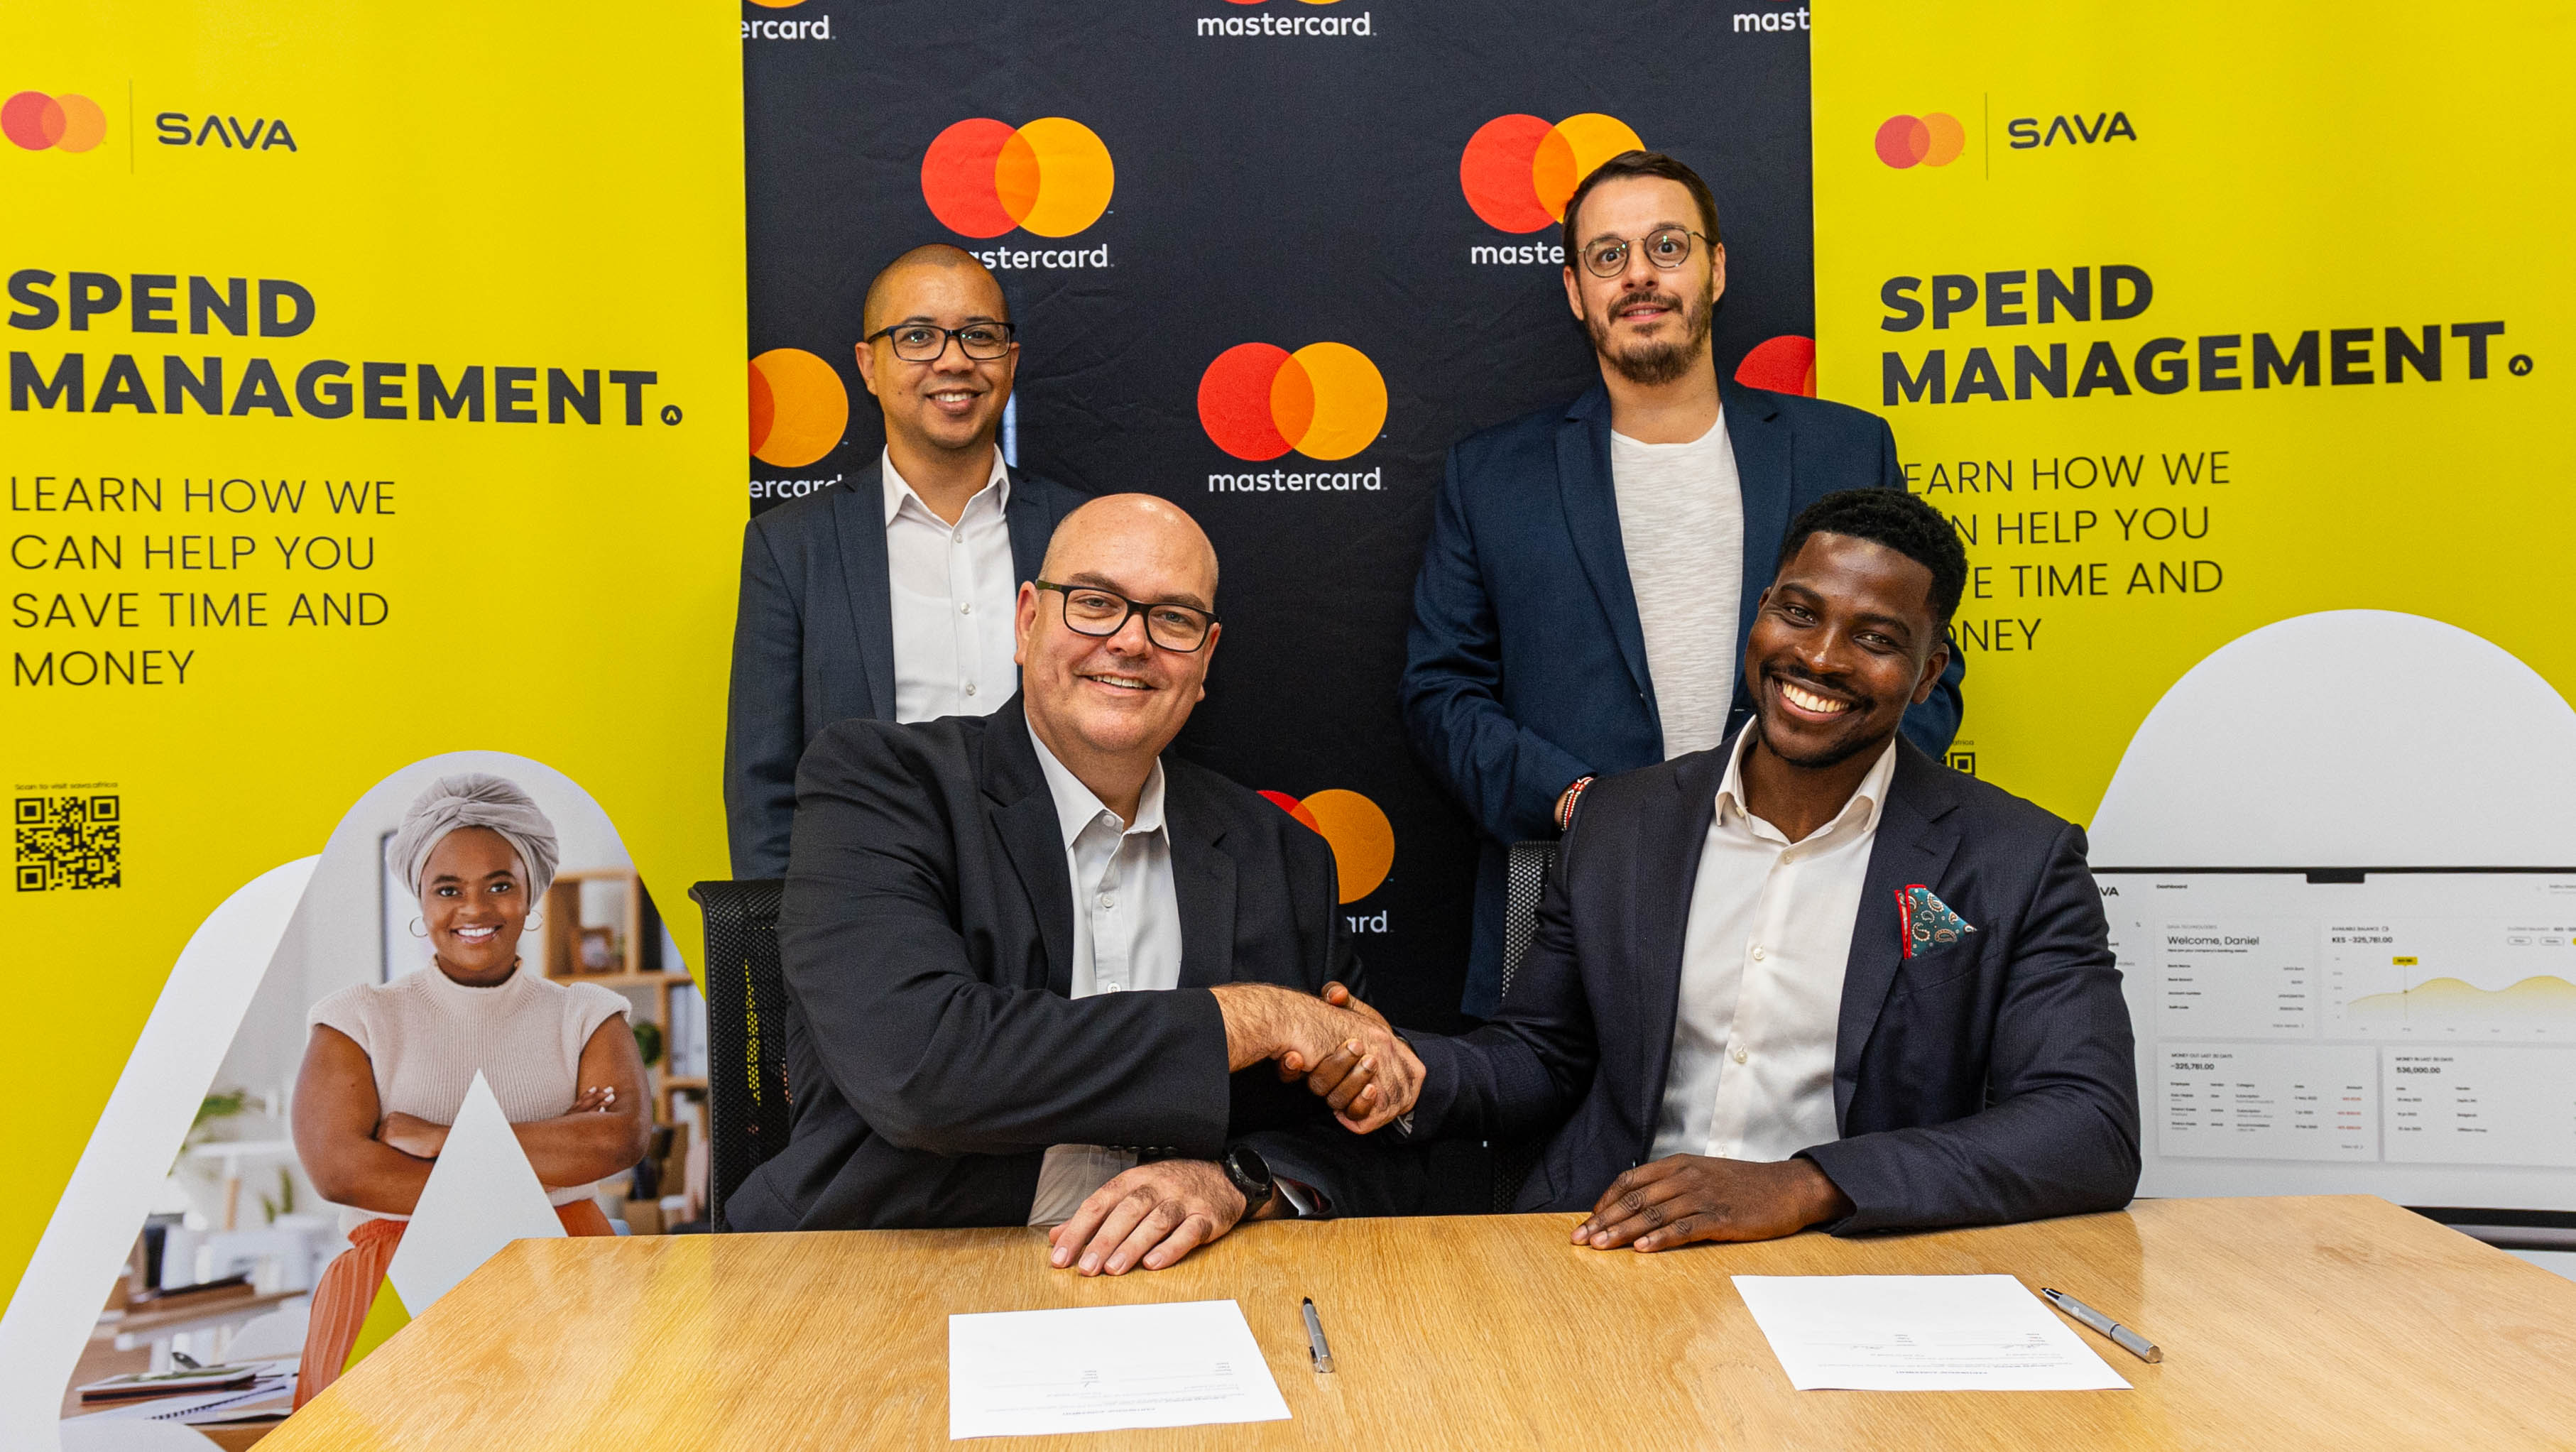 Back left: Robin van Reenen – Director Business Development, Mastercard Back right: Federico von Bary Landesmann – Co-founder, SAVA Front left: Gabriel Swanepoel – Country Manager Southern Africa, Mastercard Front right: Kola Olajide – CEO, SAVA